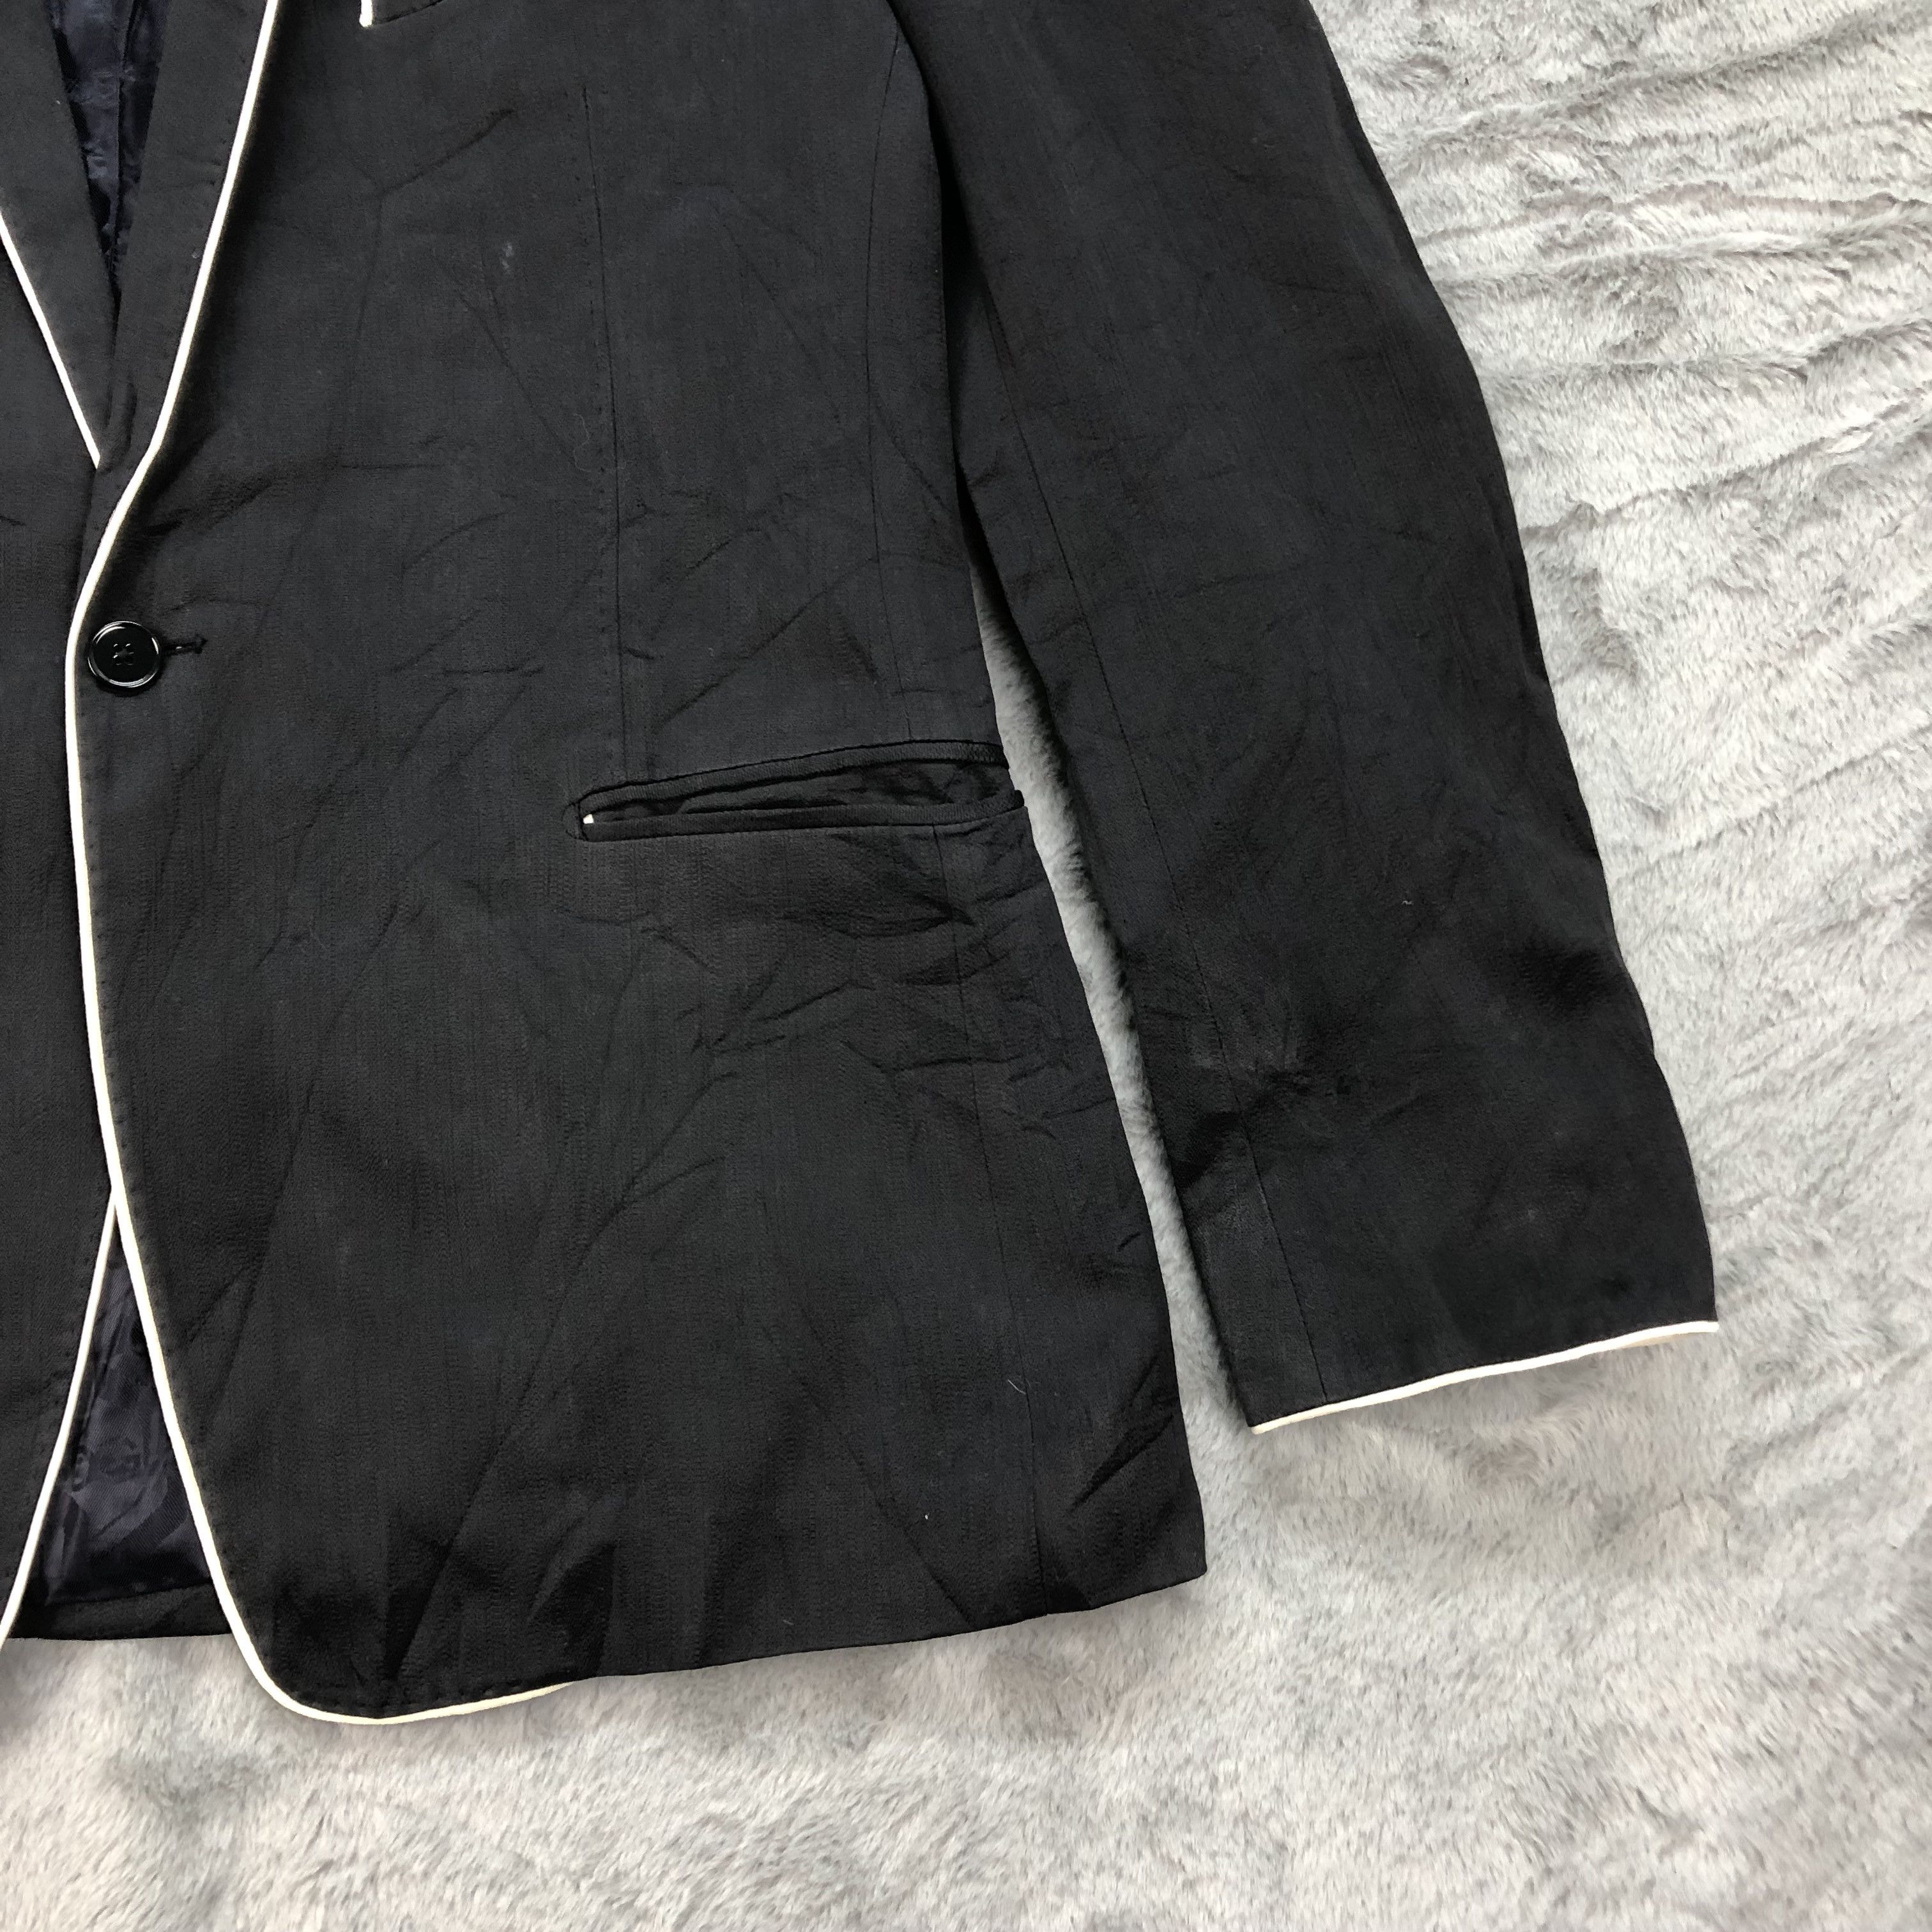 Dolce & Gabbana Made in Italy Suits Jacket #4565-159 - 5